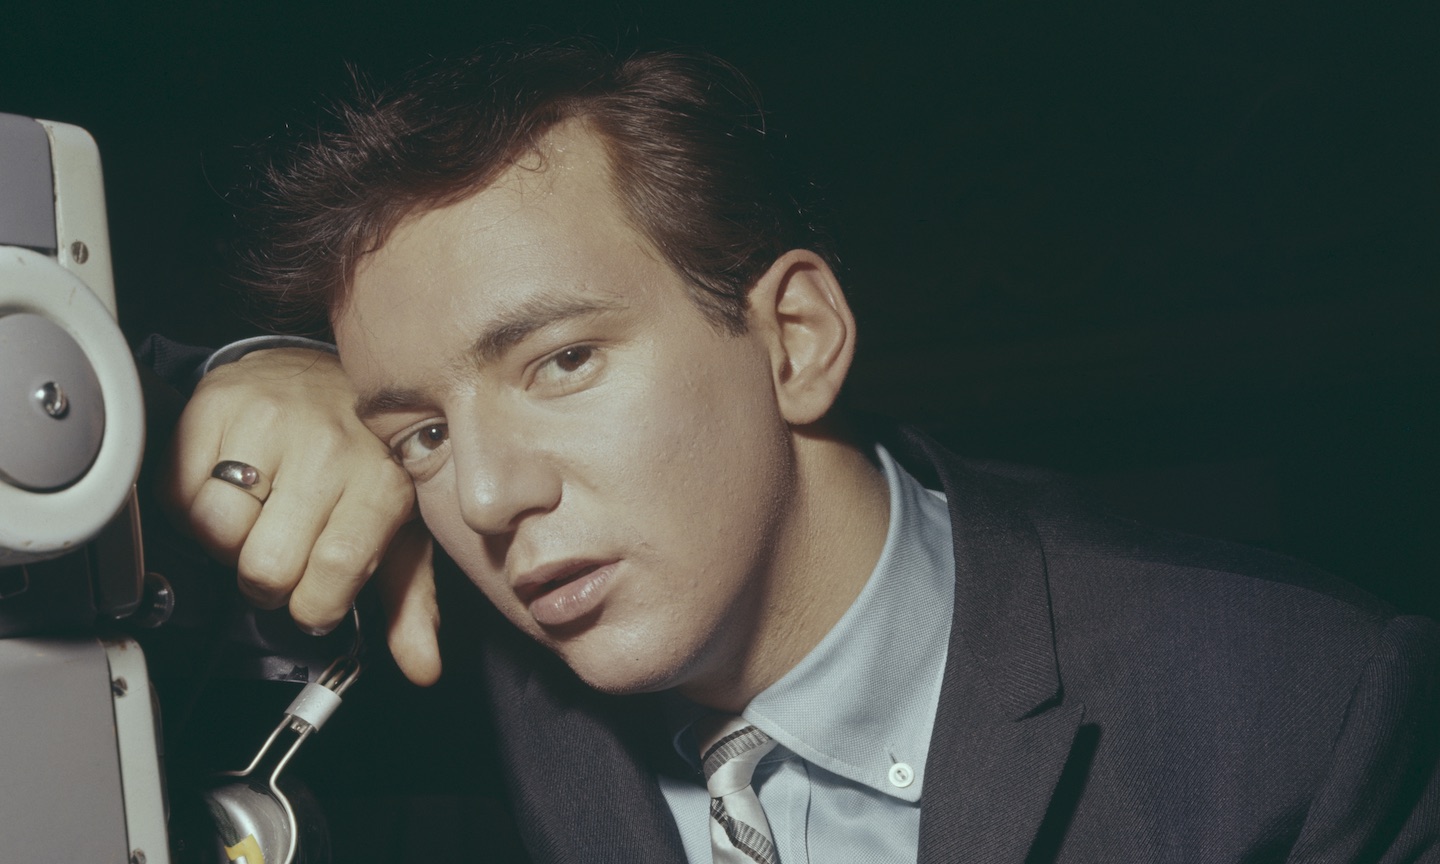 Watch Bobby Darin's Masterful 'That's The Way Love Is' On 'Ed Sullivan'